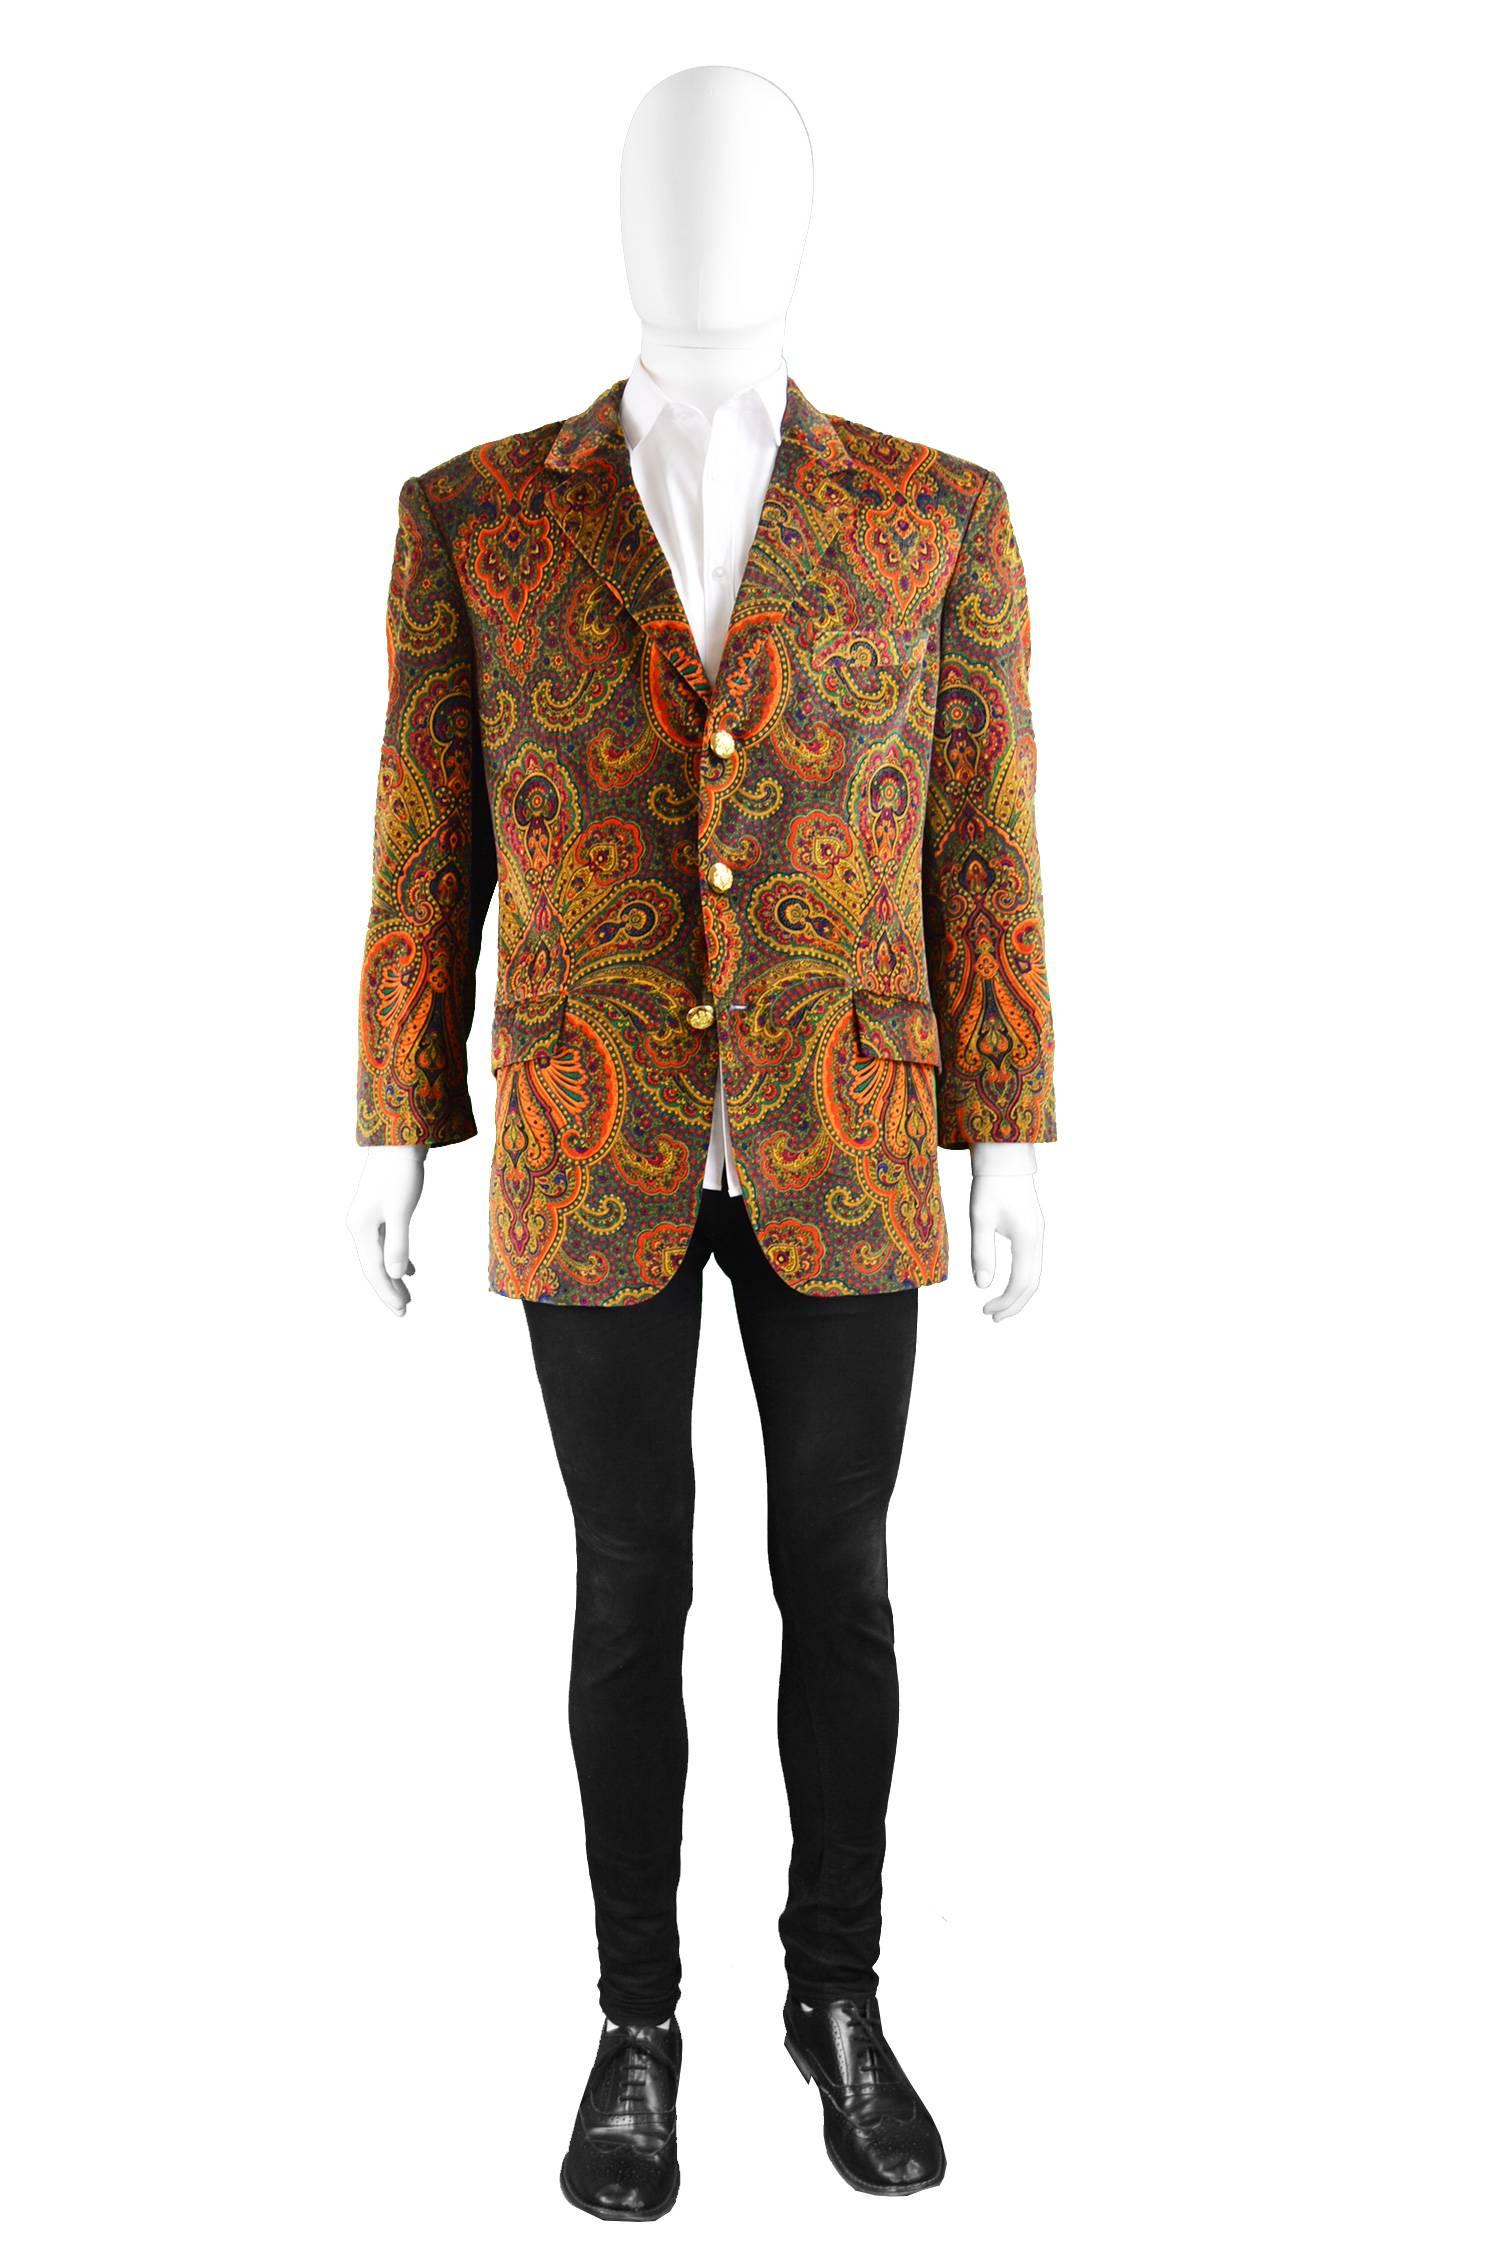 A fine and incredibly rare men's vintage blazer from the 80s by legendary Italian designer, Moschino for the men's Cheap and Chic line. So rare, this would have been designed under Franco  with high quality shoulder pads, typical of the 80s, it